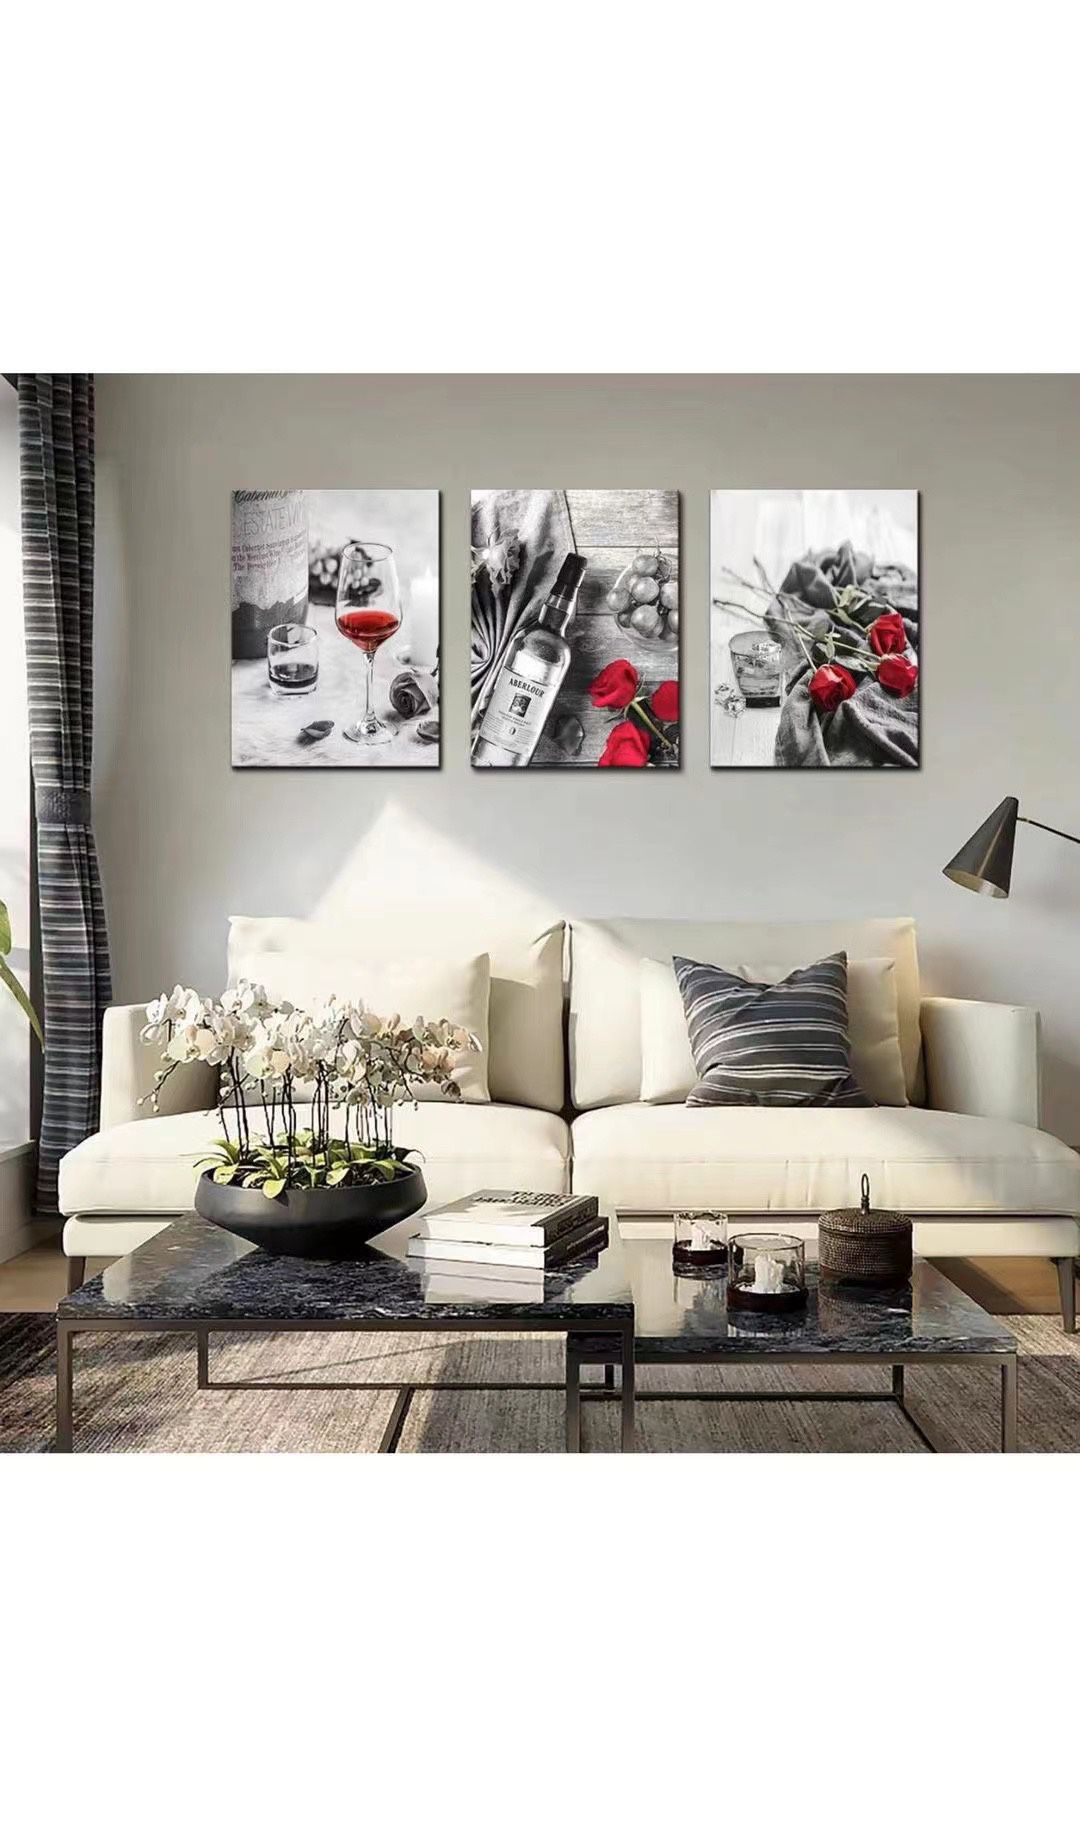 Canvas Wall Art Decor Wine Painting Artwork Poster Red Wine In Cups With Ice Rose Black White Canvas Wall Art Print Framed Pictures Red Rose Poster Gi